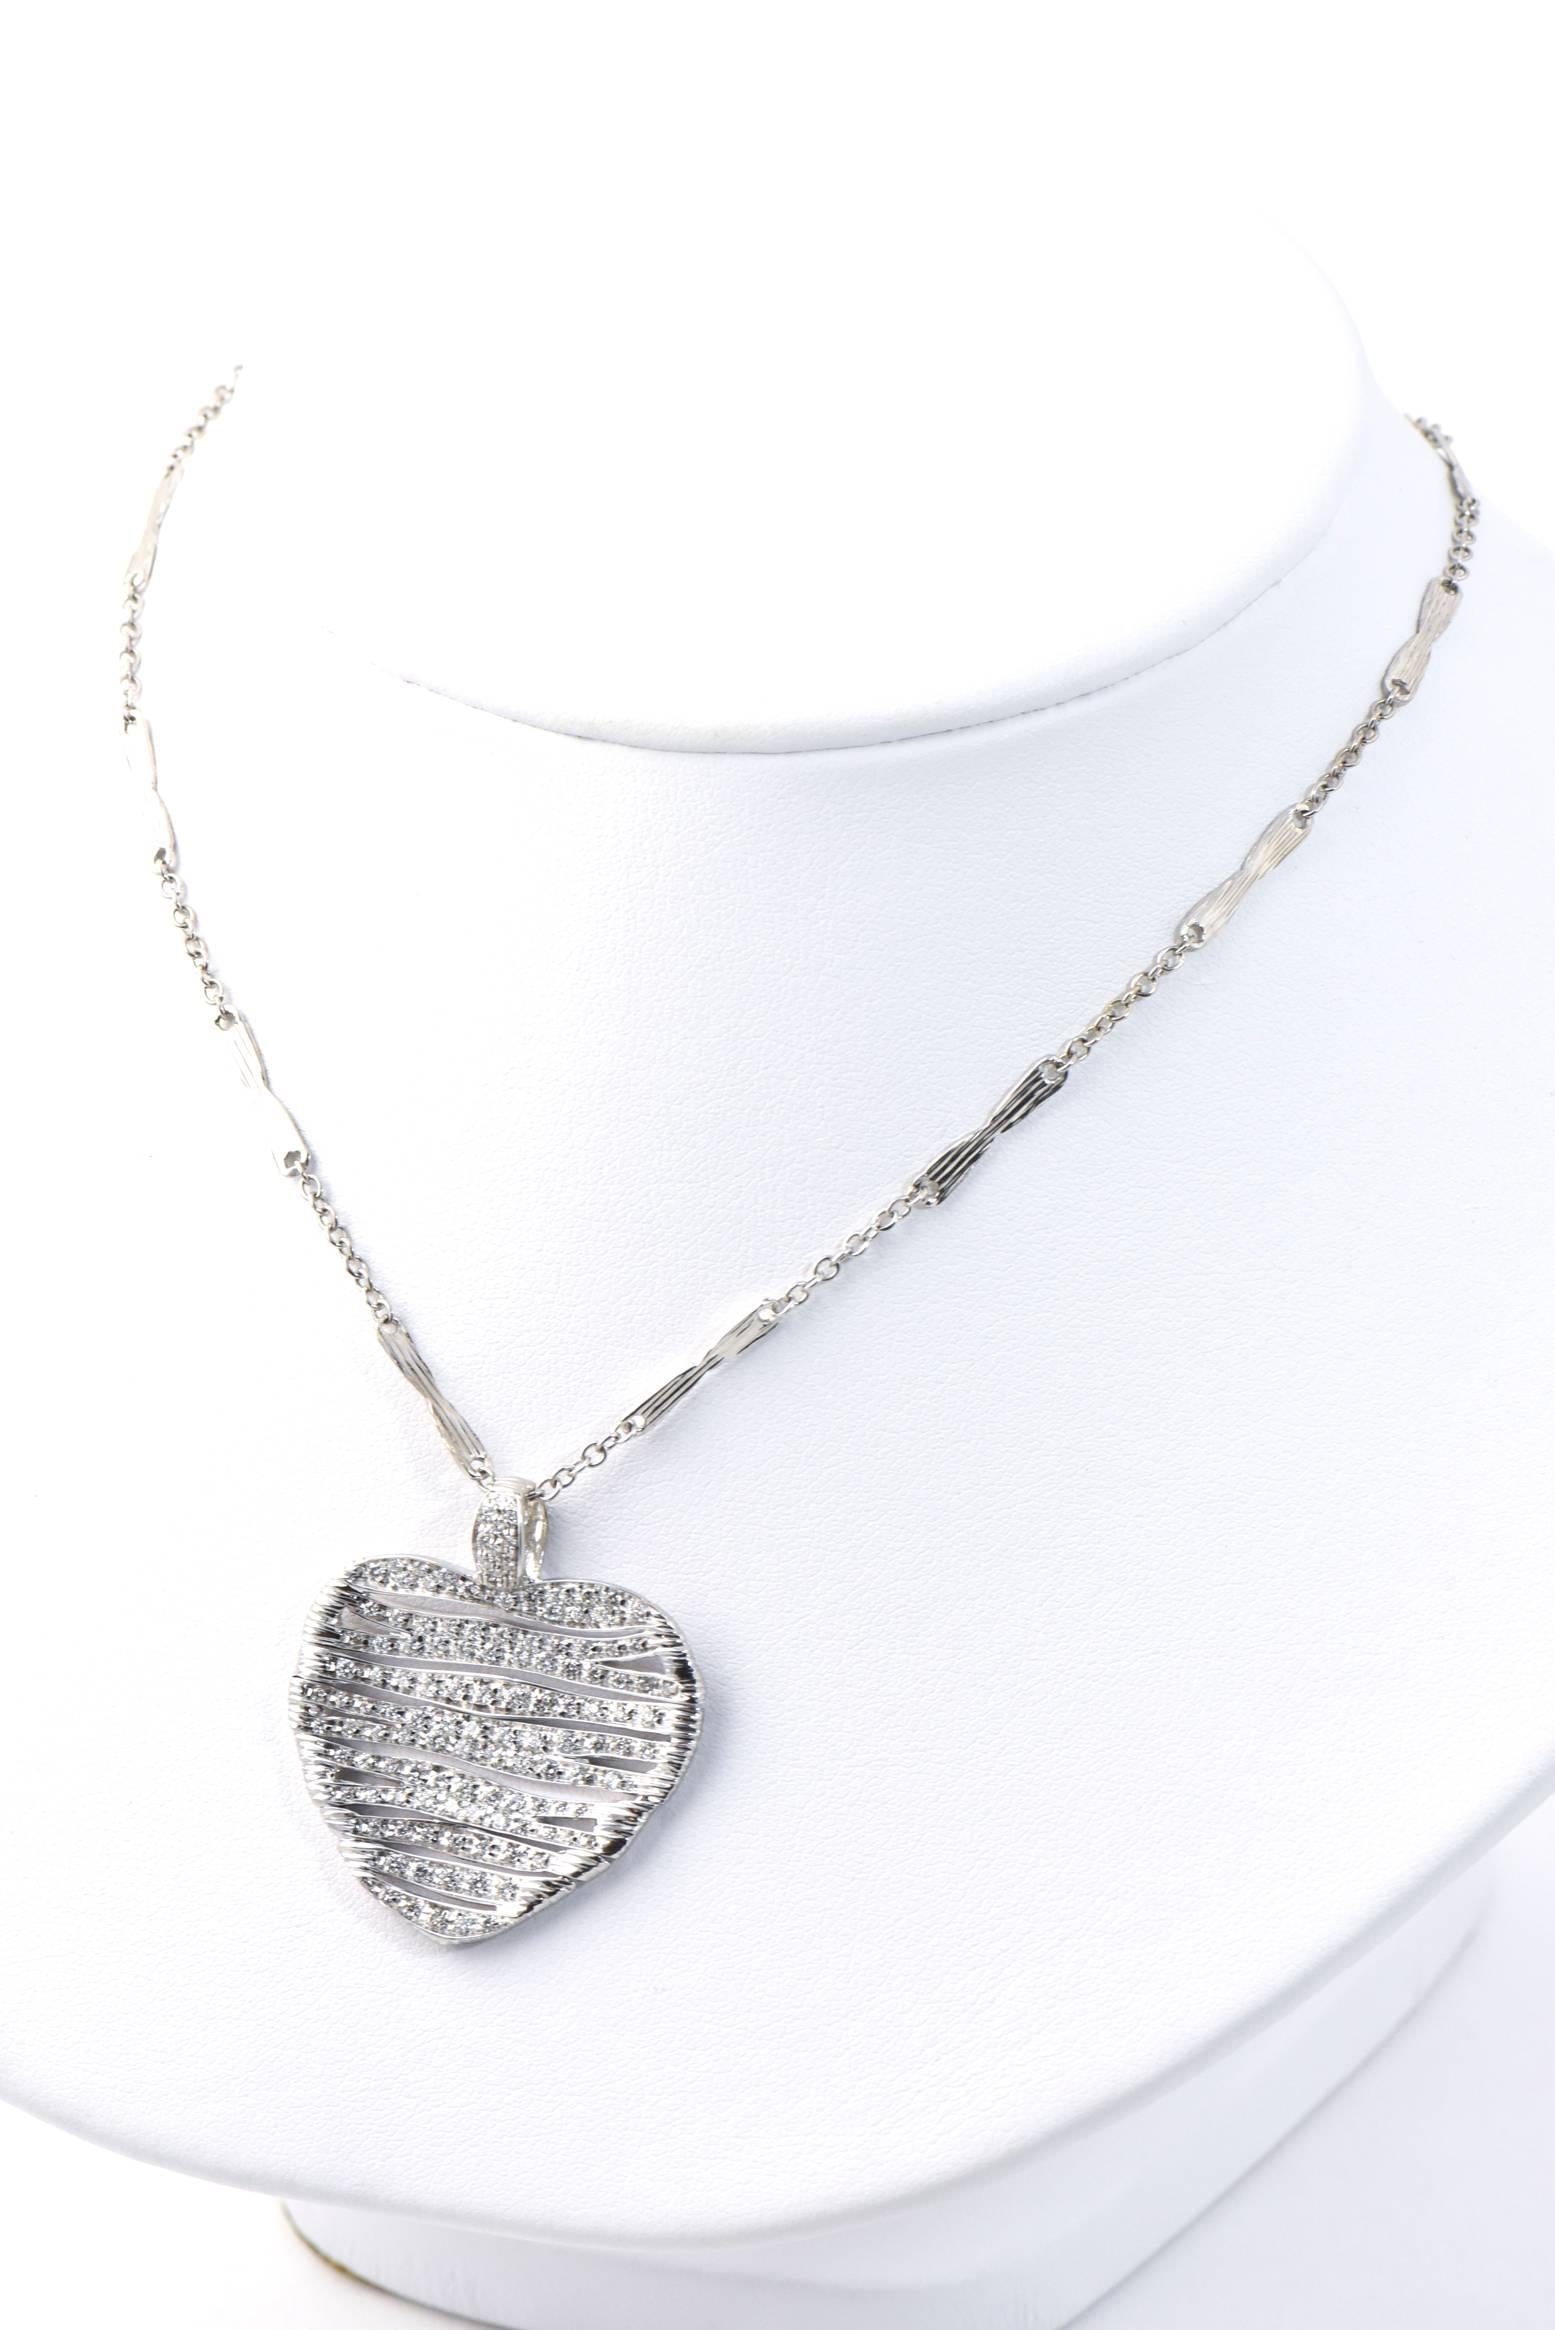 Roberto Coin Diamond Gold Heart Necklace from Elefantino Collection 2